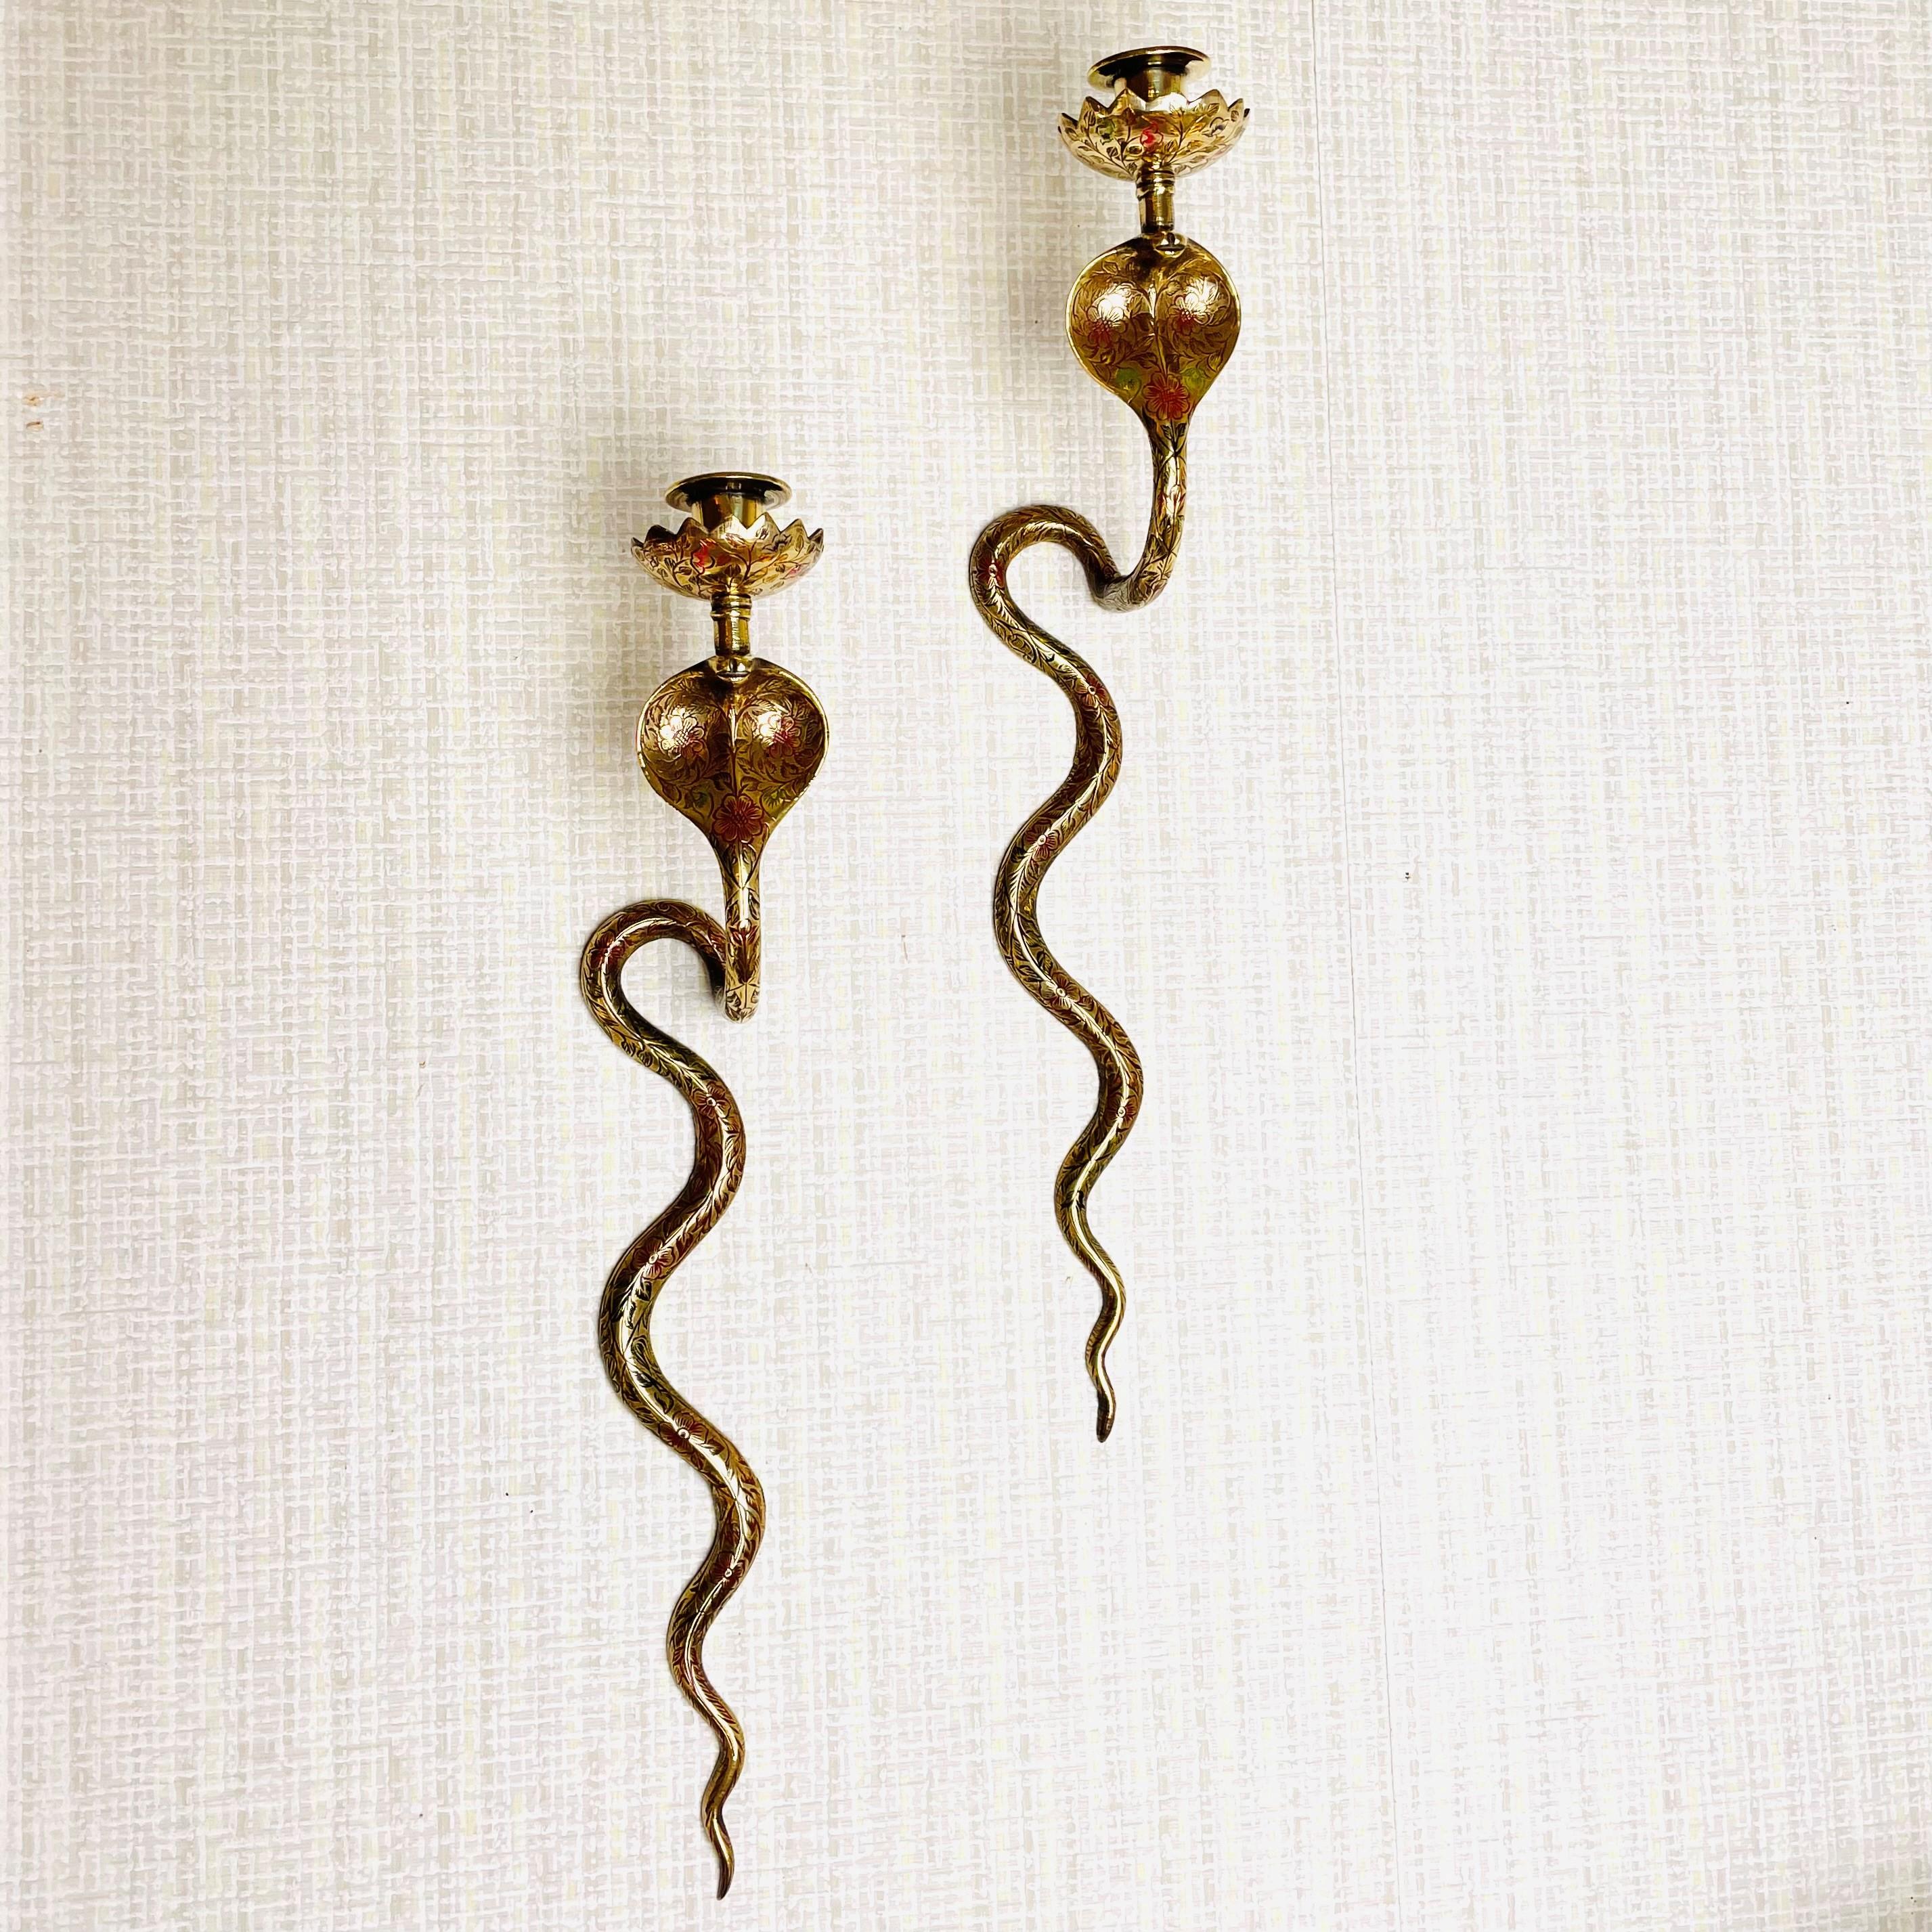 A pair of Wall Lights in the shape of a Cobra. Art Deco, 1920s-1930s. Scary but beautiful. Elegantly made in brass.

Wear consistent with age and use.